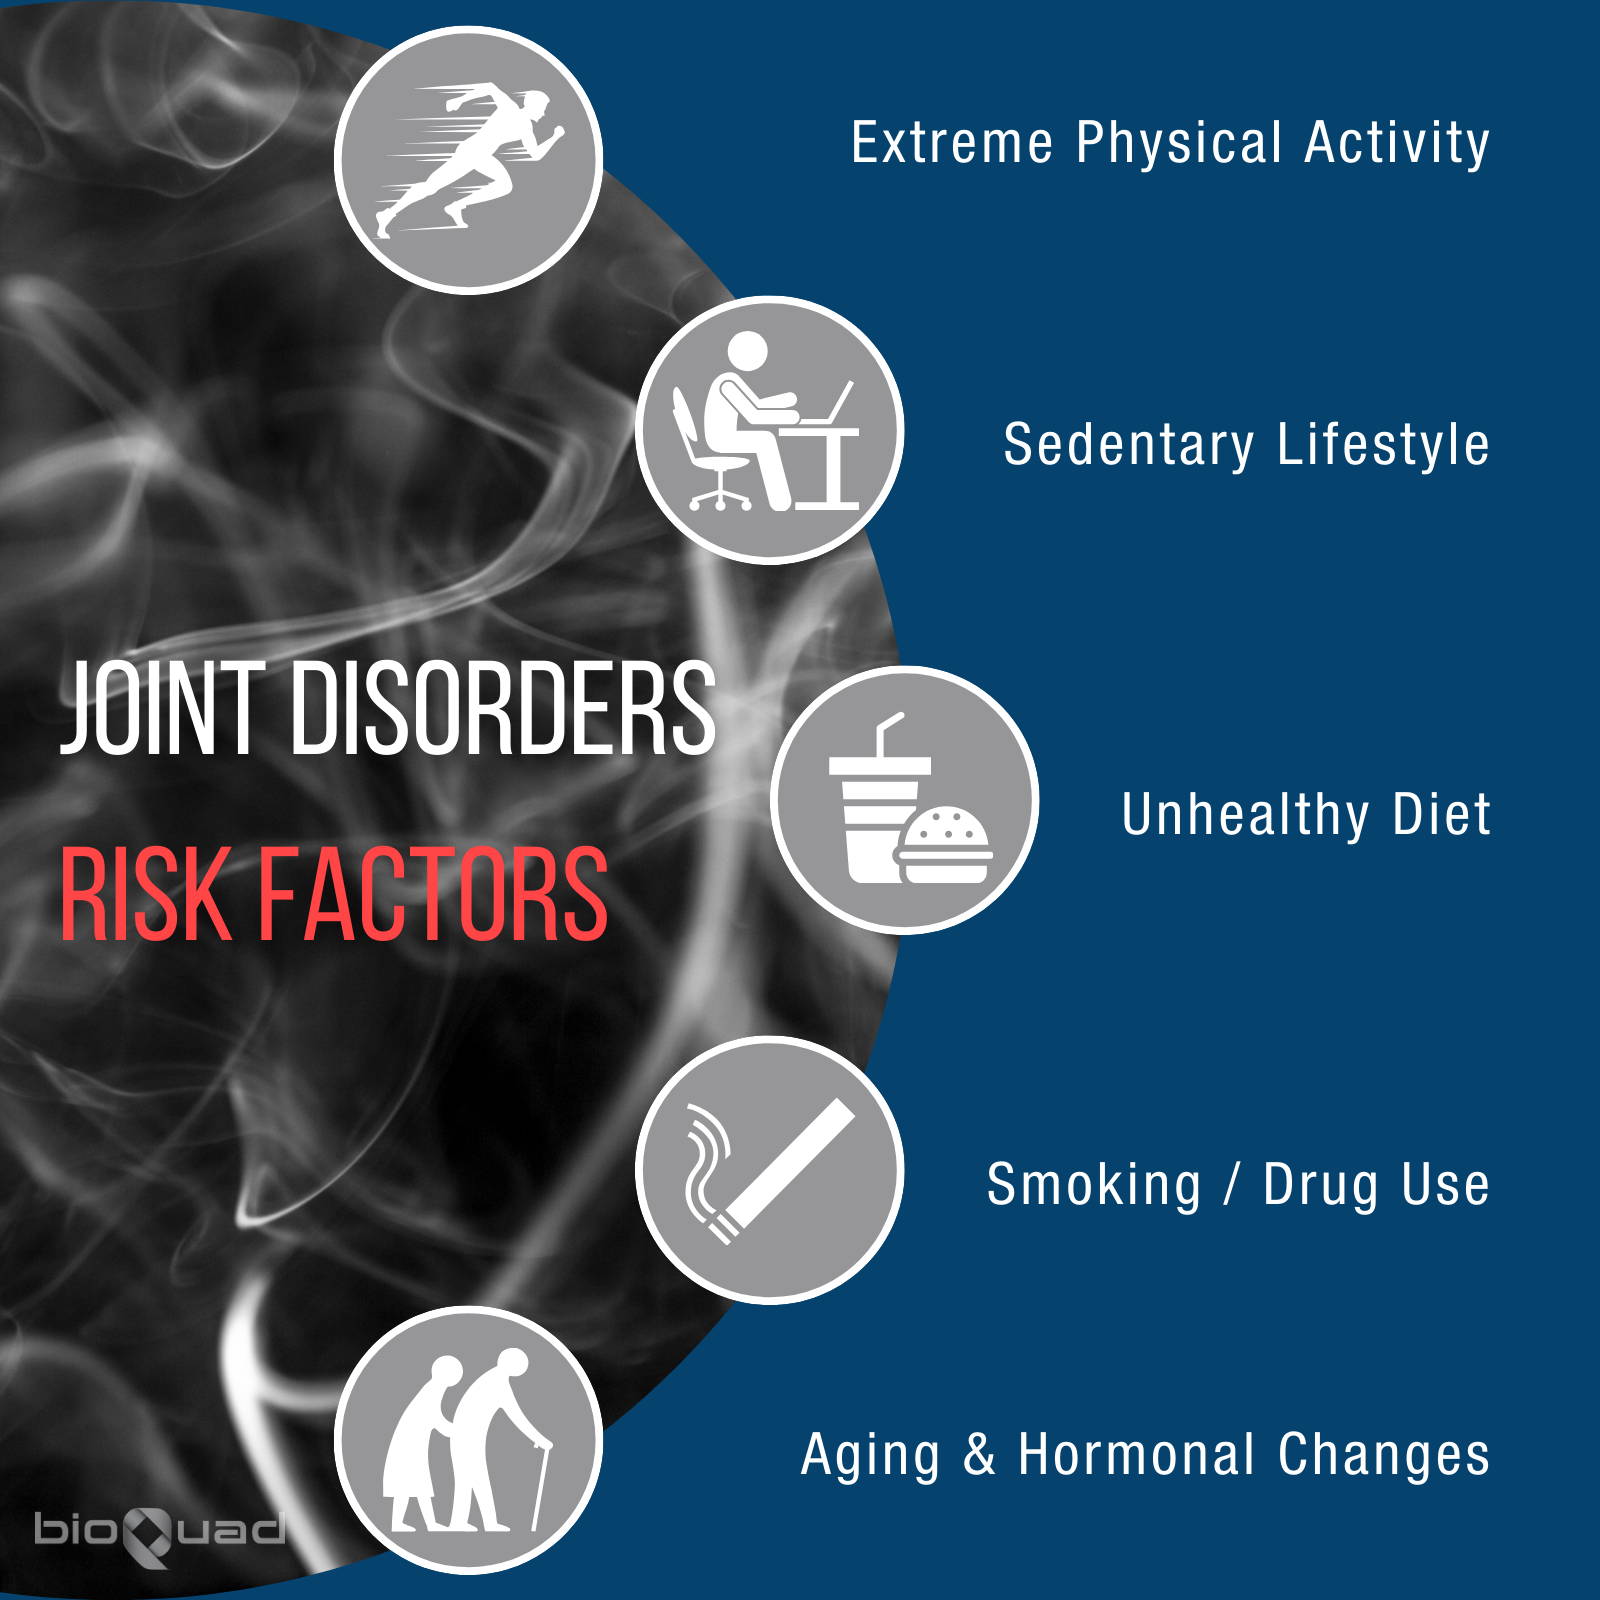 X-ray image overlay with icons illustrating joint disorders risk factors including extreme physical activity, sedentary lifestyle, unhealthy diet, smoking or drug use, and aging with hormonal changes, provided by bioQuad.